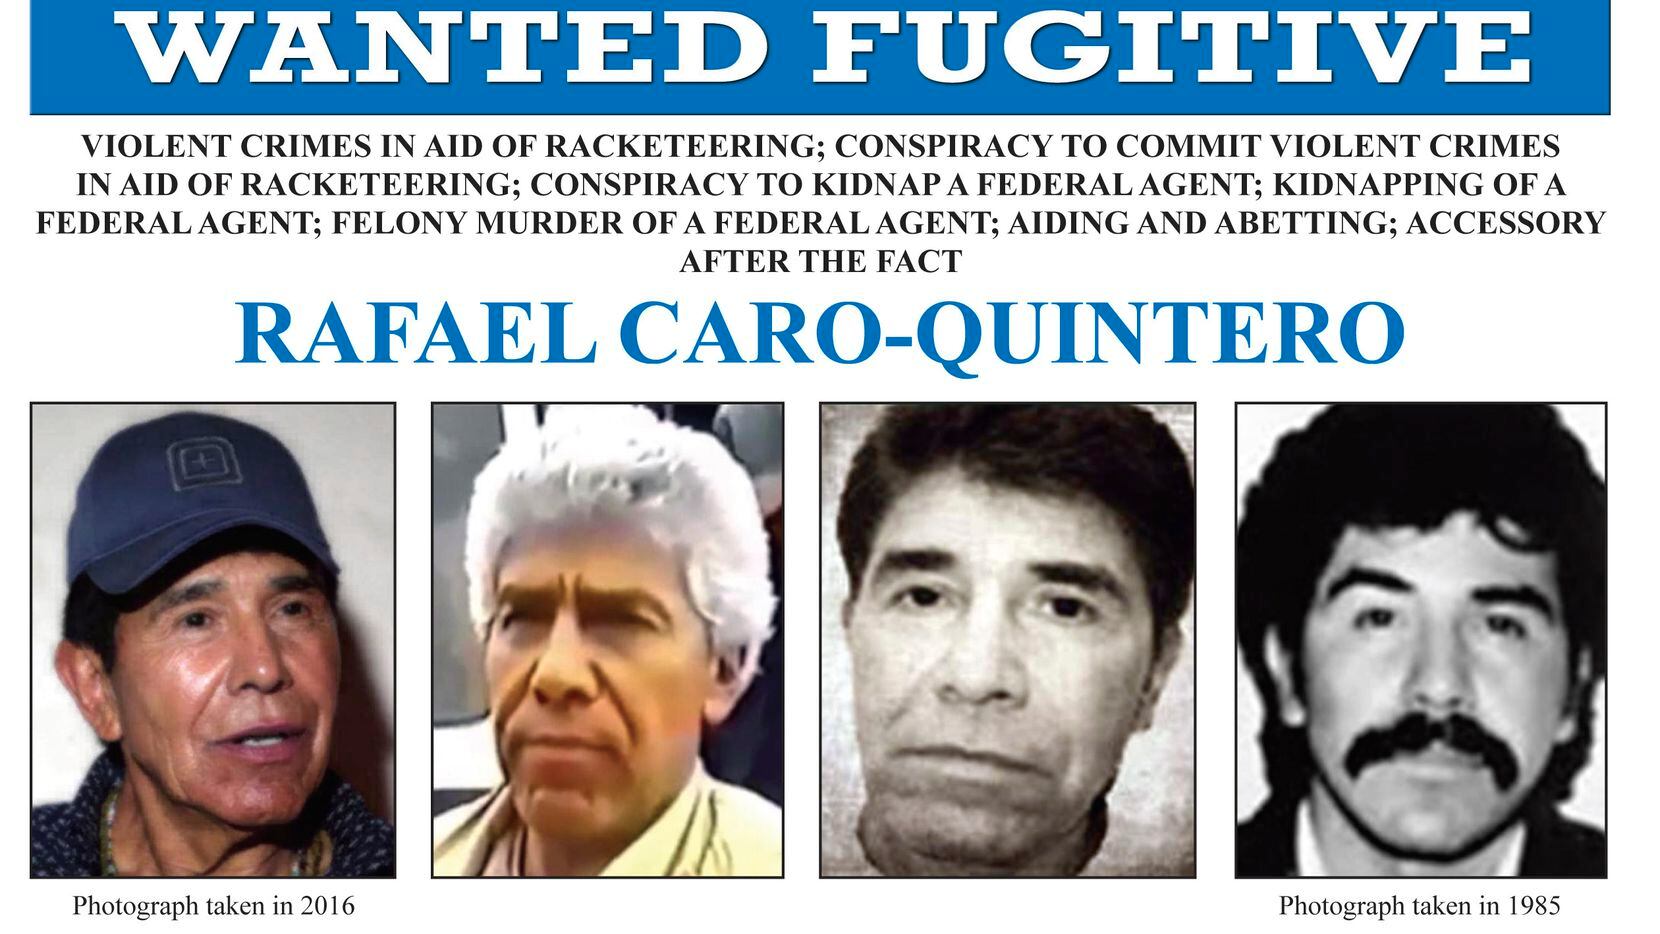 This image released by the FBI shows the wanted poster for Rafael Caro Quintero, who was...